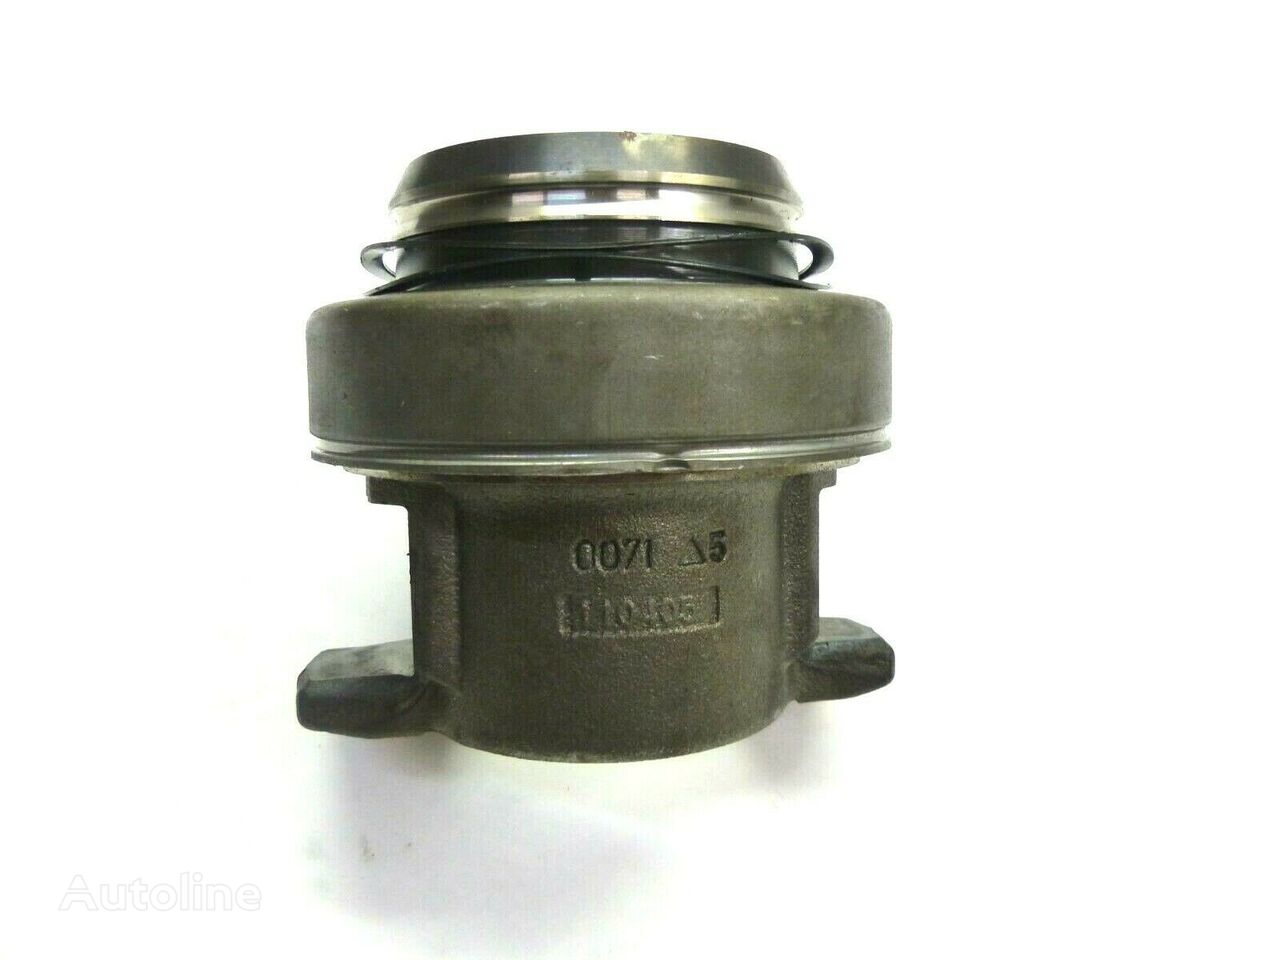 Sachs 504120865 throwout bearing for IVECO truck